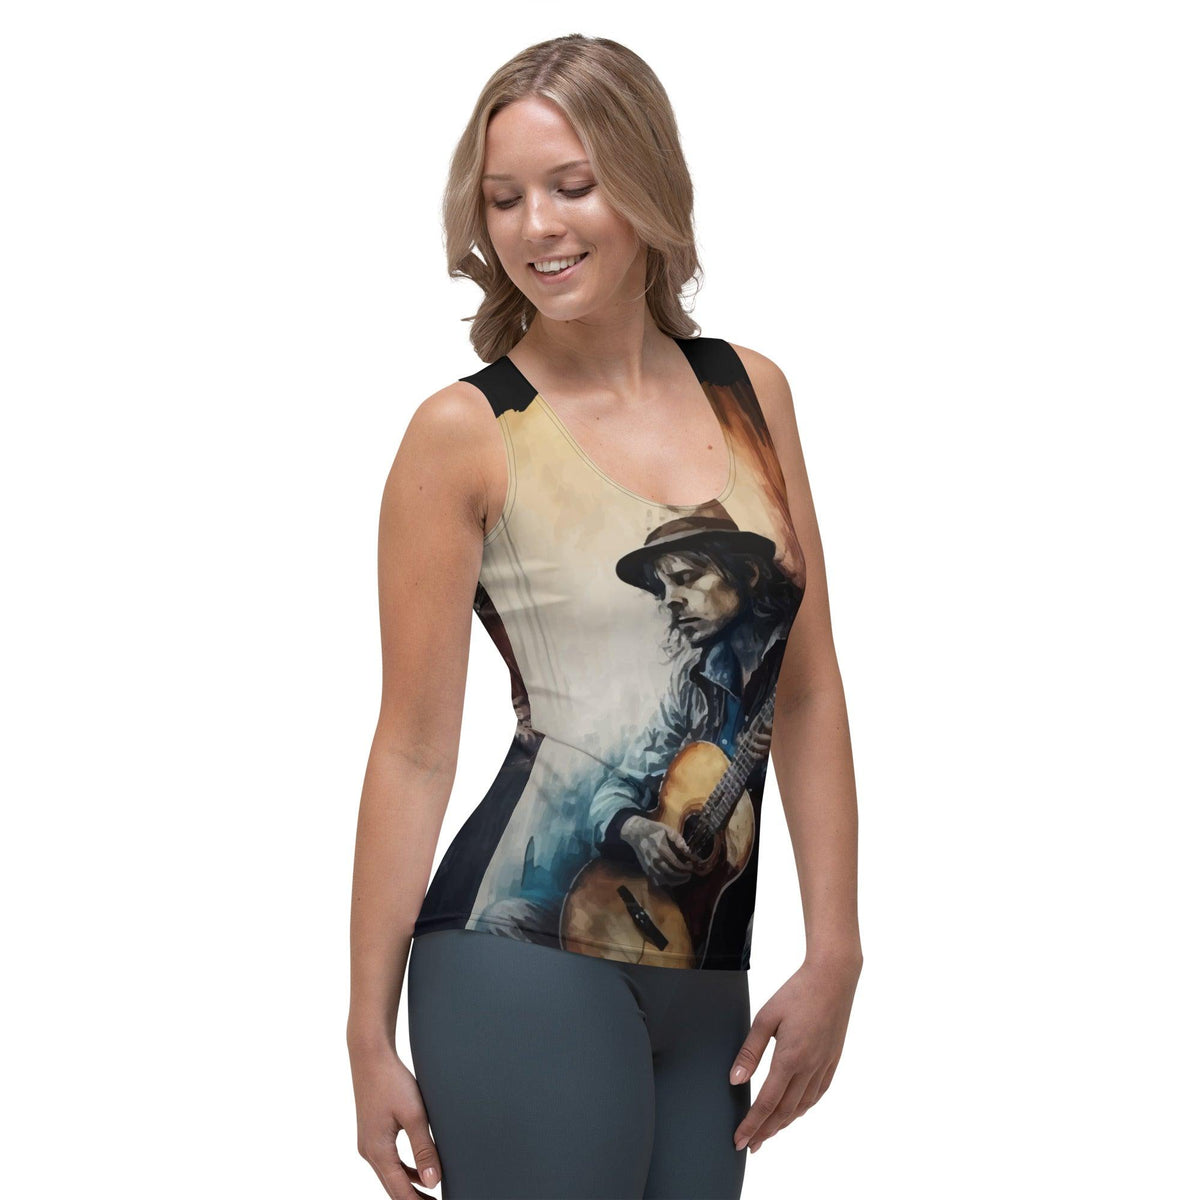 Guitar Is Poetry in Motion Sublimation Cut & Sew Tank Top - Beyond T-shirts